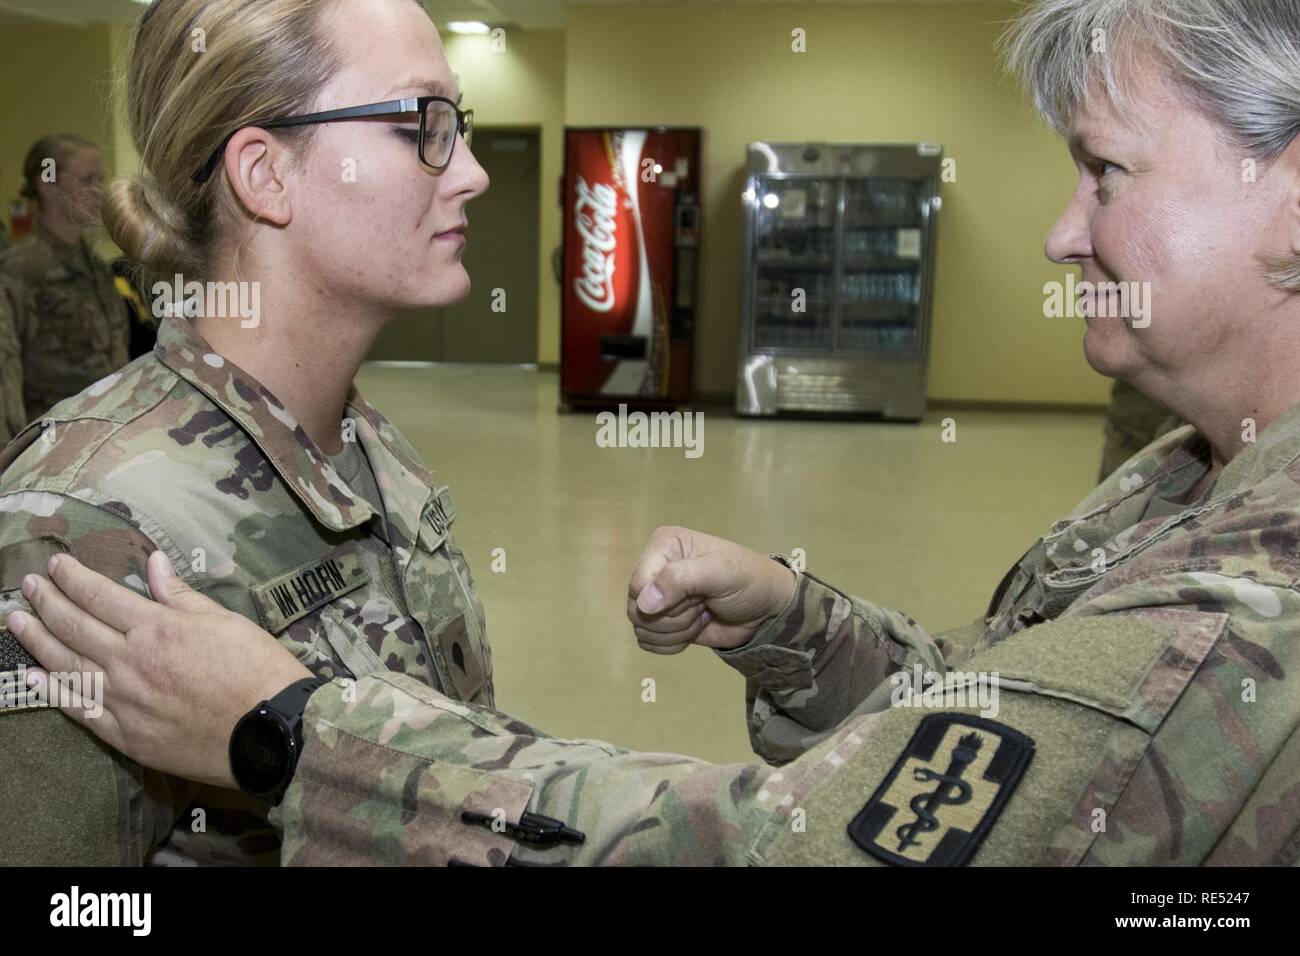 U.S. Army Spc. Jenna Van Horn, a newly promoted pharmacy specialist, is pinned by her mother, U.S. Army Maj. Lisa Van Horn, the chief of patient administration, both assigned to the 452nd Combat Support Hospital during Jenna Van Horn's promotion ceremony in Camp Arifjan, Kuwait, Jan. 2, 2019. The Van Horns shared the unique experience of deploying together as a mother and daughter team to help support the health readiness of service members throughout Central Command's area of responsibility. Stock Photo